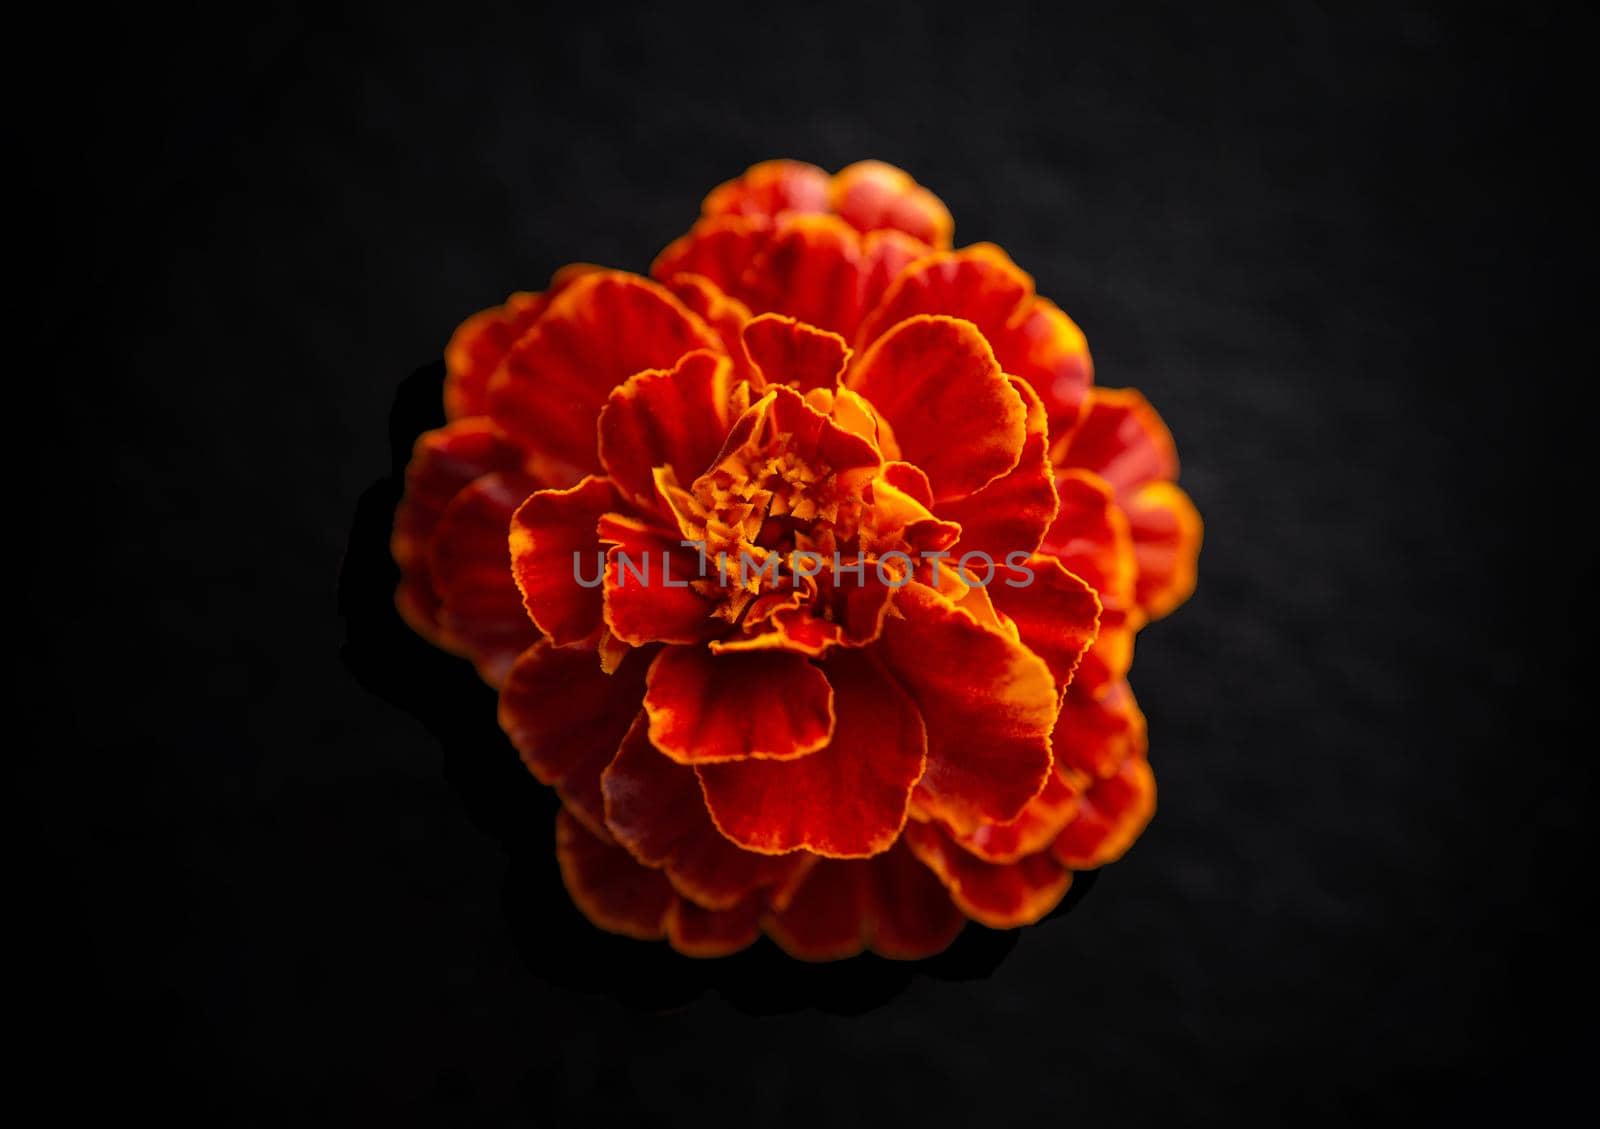 Studio shot of flower on black background. Flat lay, top view.